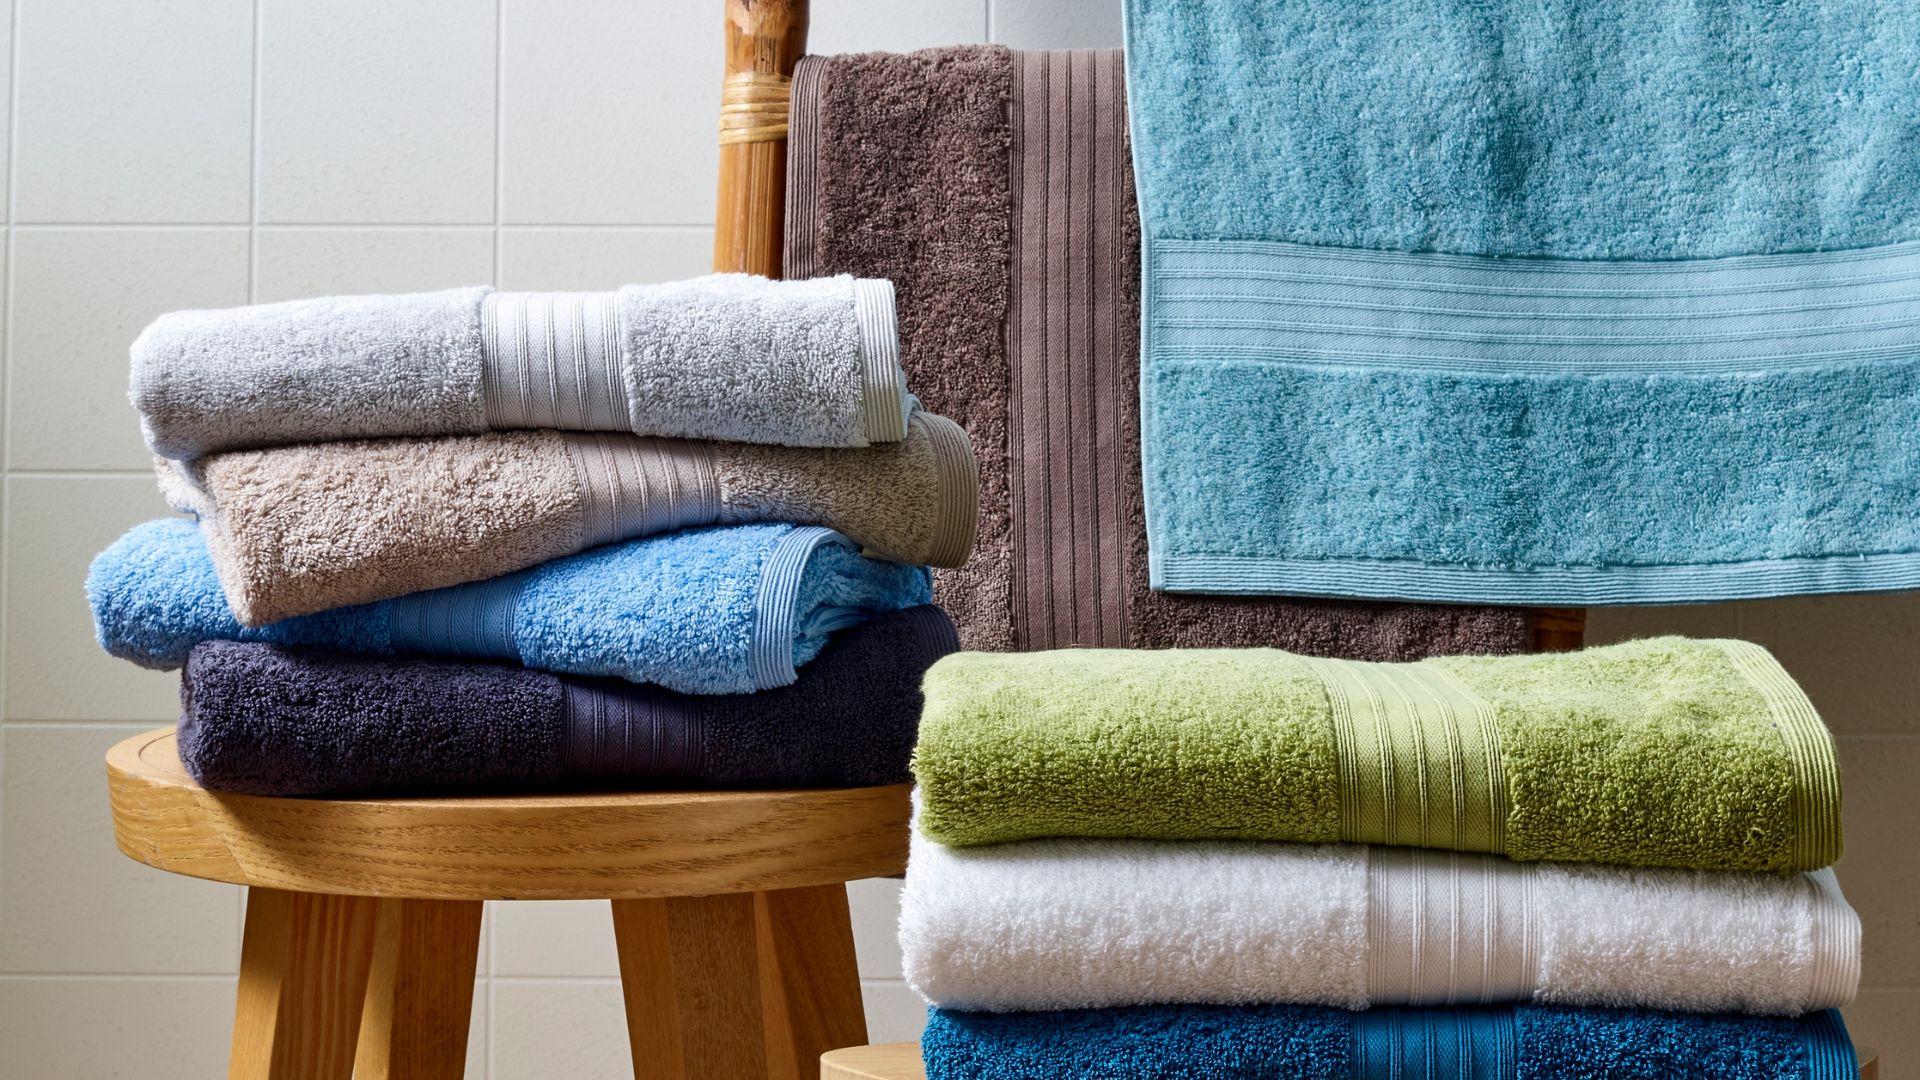 Extra towel care tips